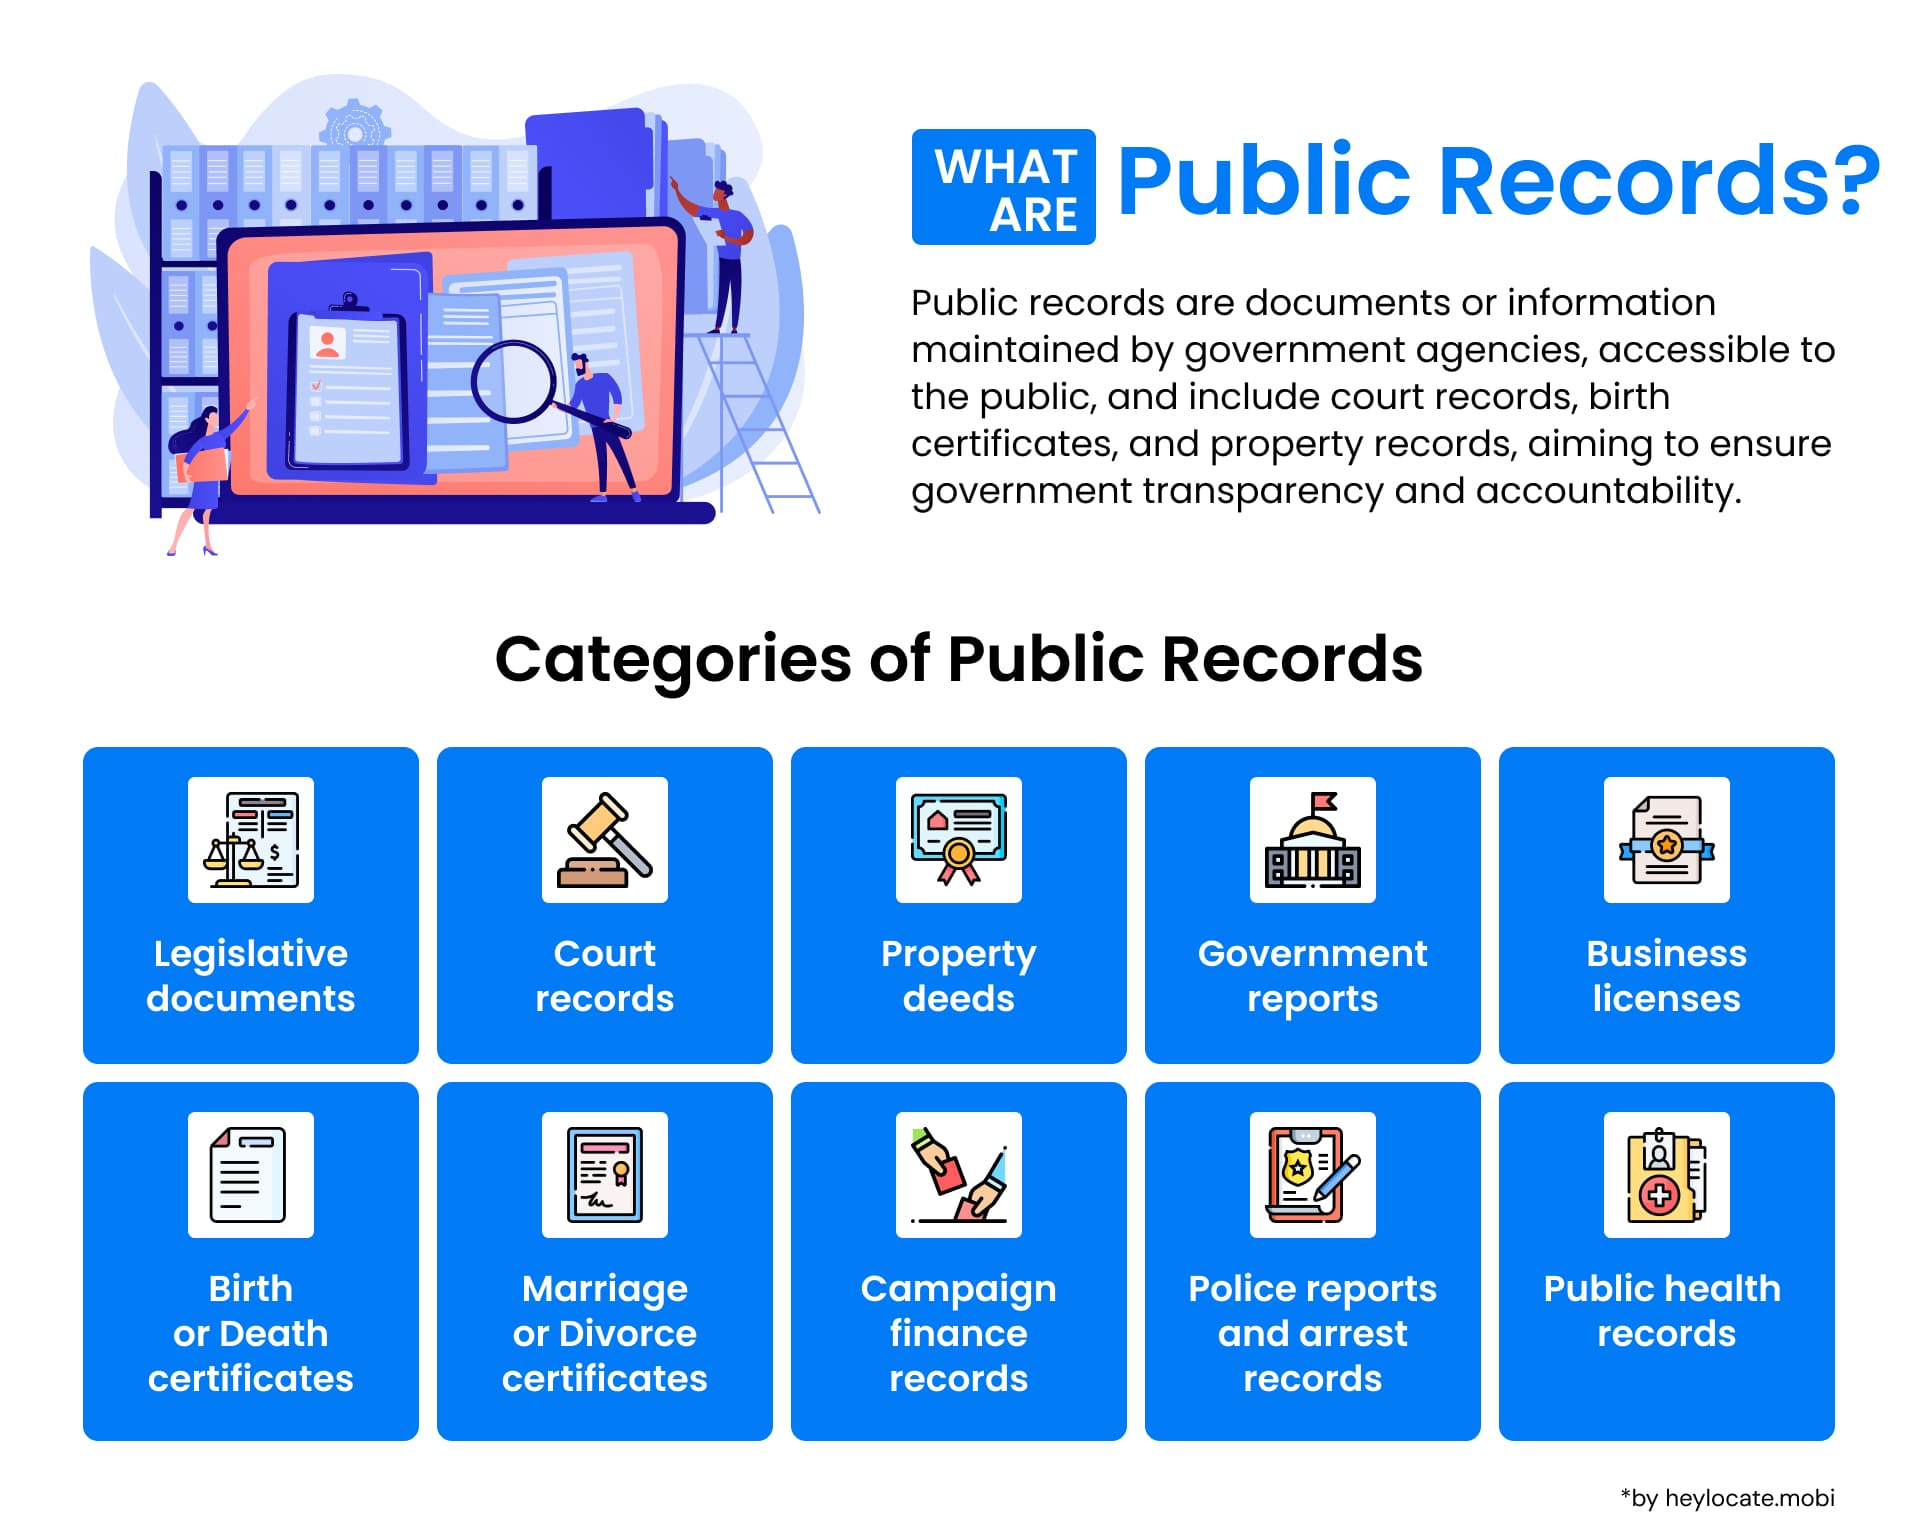 An infographic detailing what public records are, with icons representing different categories, from legislative documents to health records